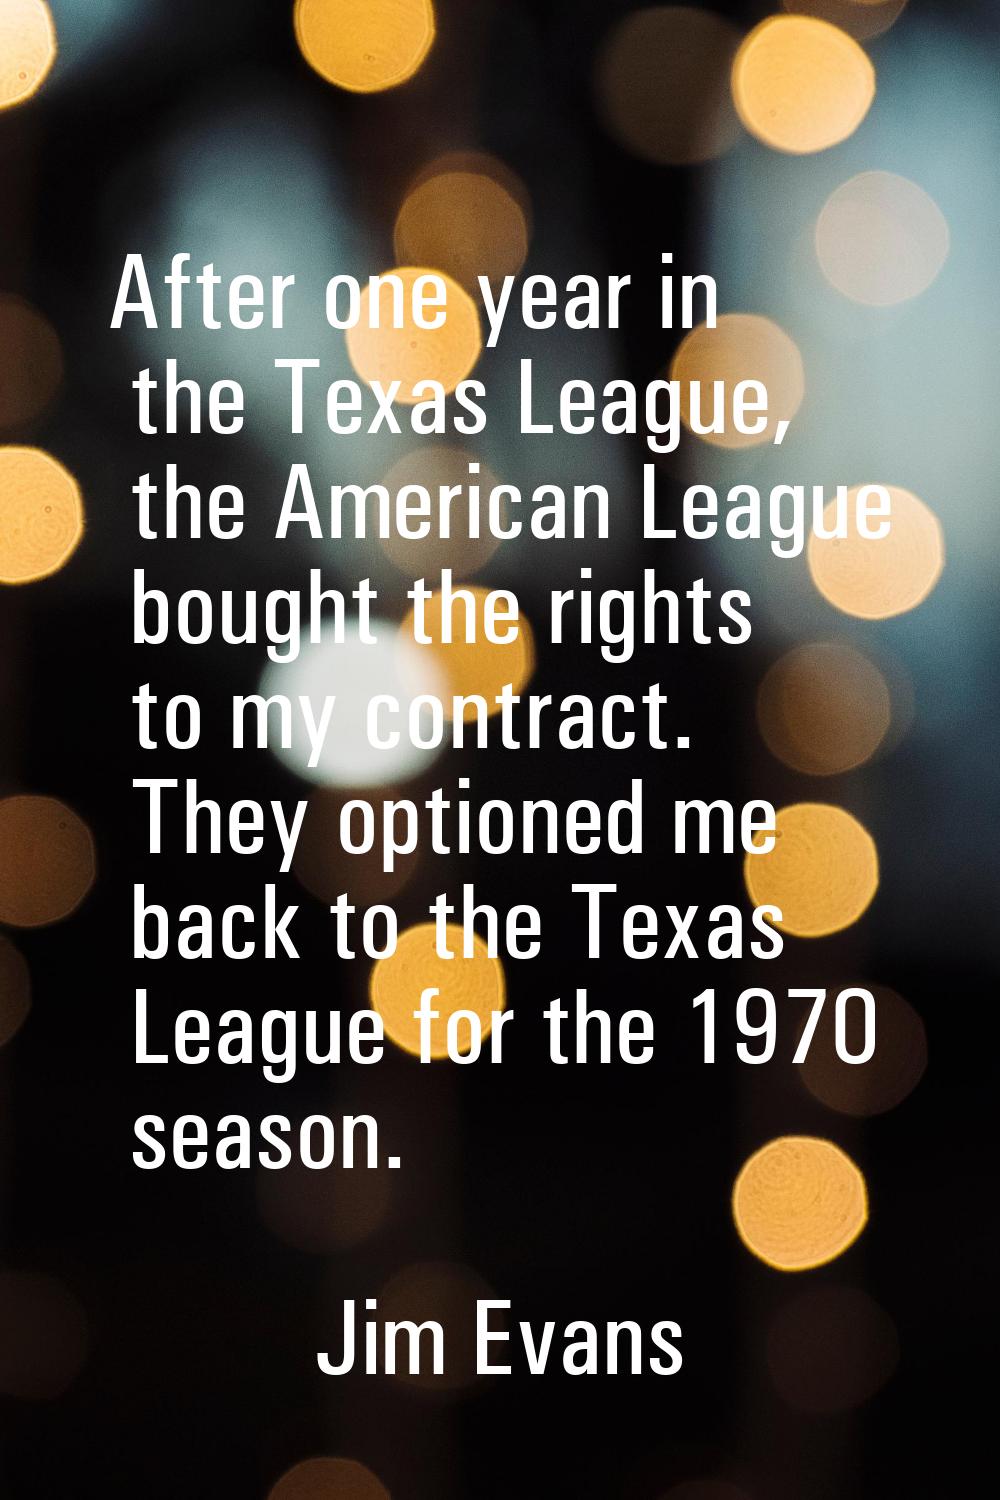 After one year in the Texas League, the American League bought the rights to my contract. They opti